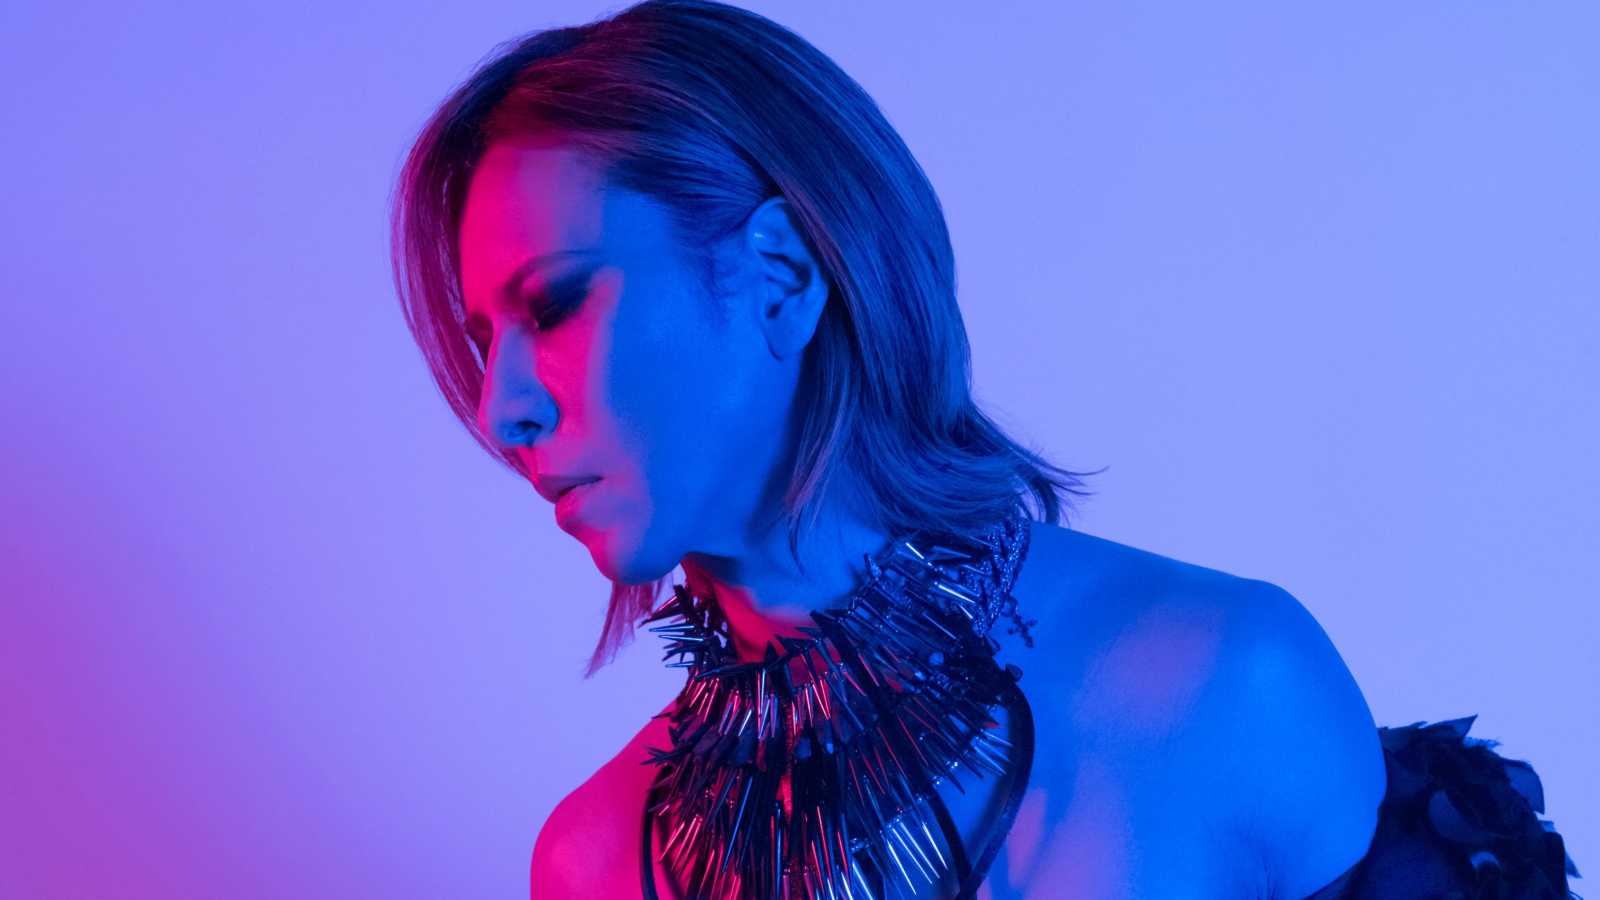 "YOSHIKI : "UNDER THE SKY", le documentaire musical en streaming sera diffusé en avant-première sur YouTube © YOSHIKI. All rights reserved.